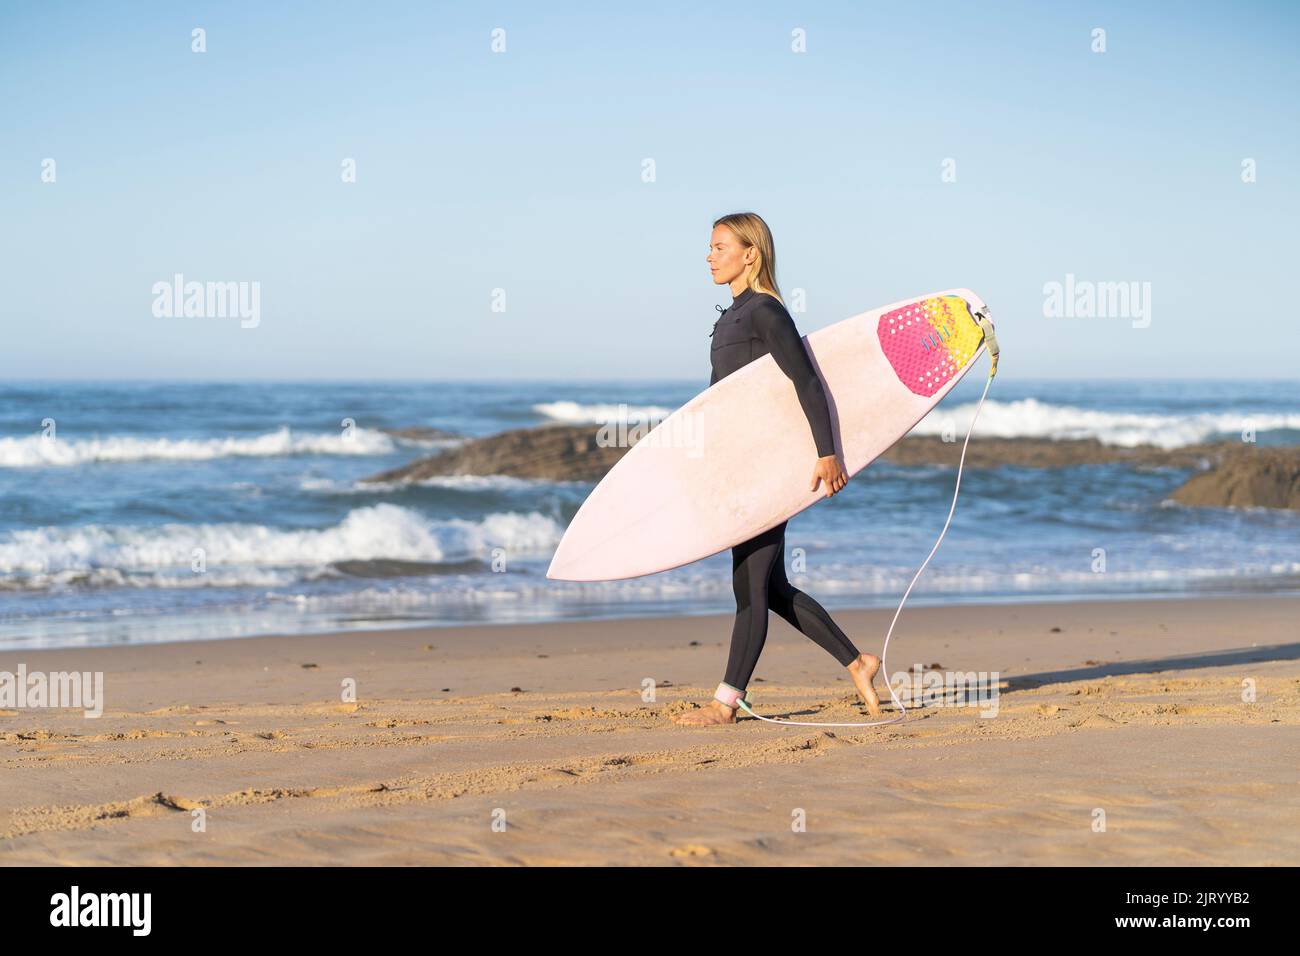 Surfer girl at the beach walking with her surfboard in the morning. Female surfer woman Stock Photo